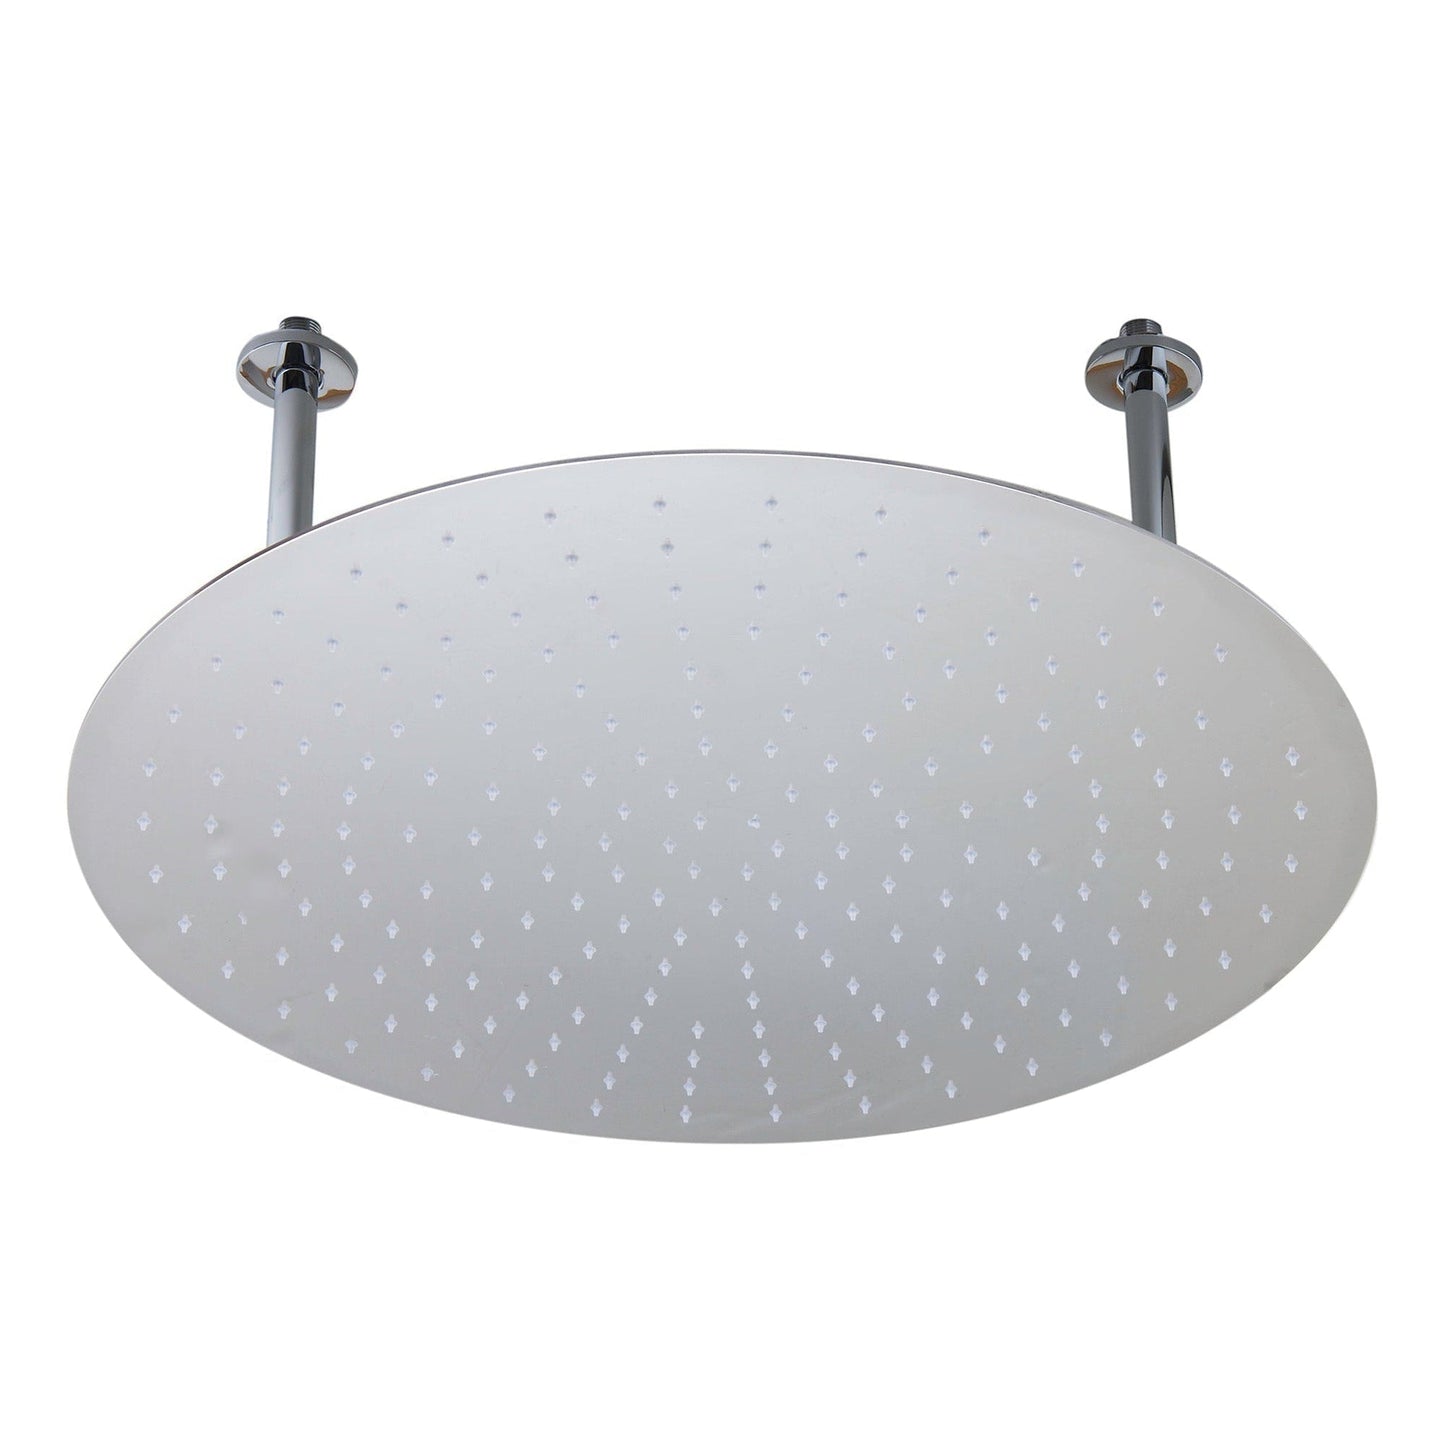 ALFI Brand RAIN24R-PSS 24" Round Solid Polished Stainless Steel Wall or Ceiling Mounted Ultra Thin Rain Brass Shower Head